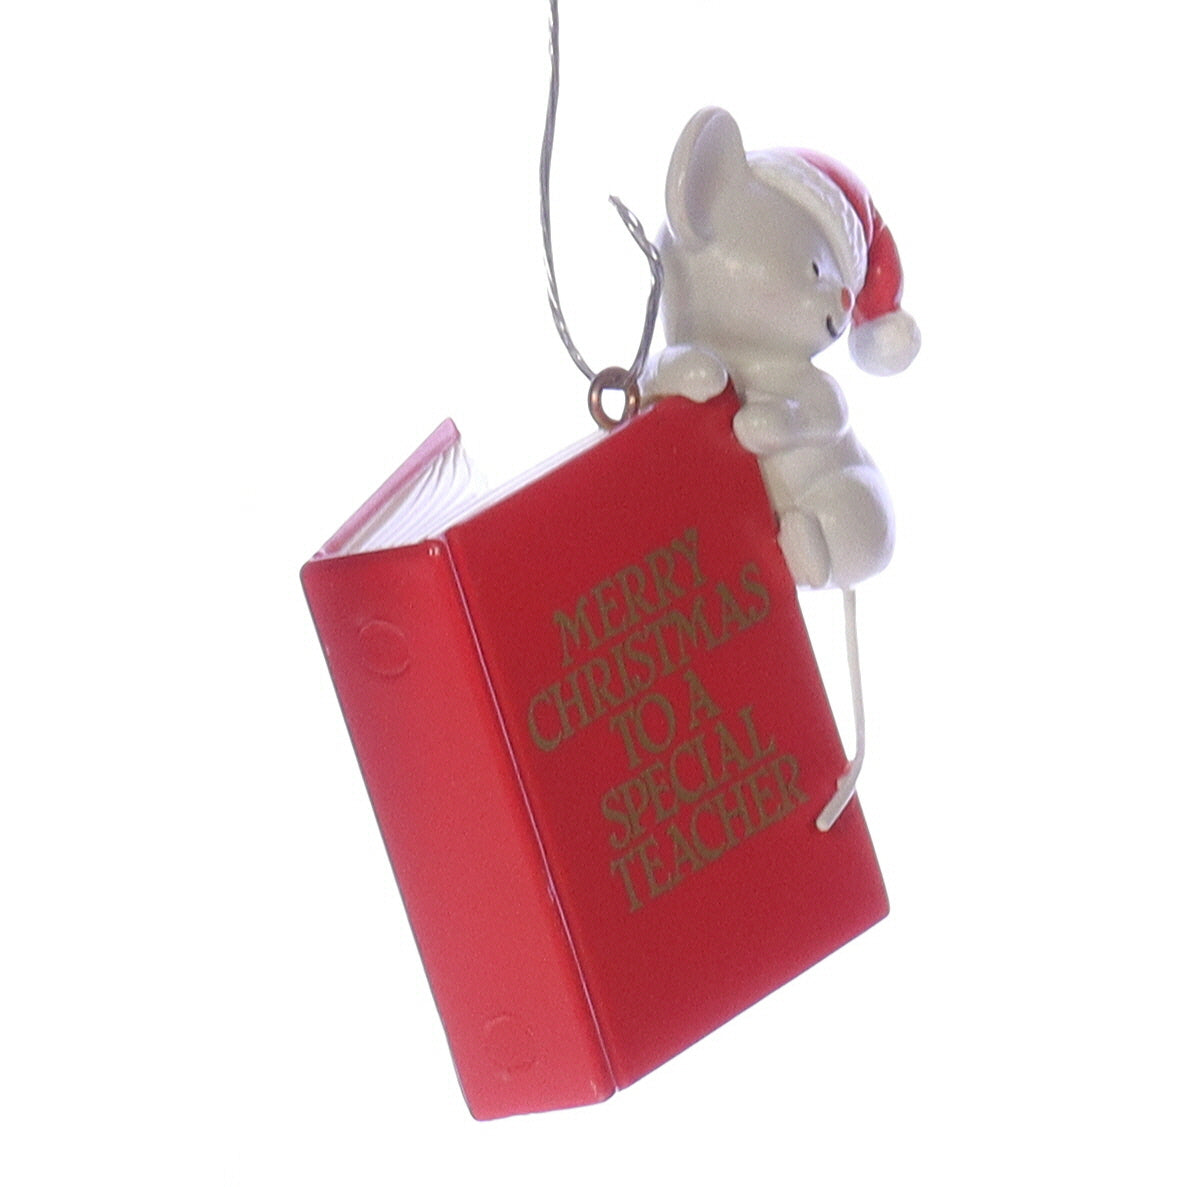 Enesco_Treasury_of_Christmas_Ornaments_specialteacher_To_A_Special_Teacher_Mouse_Ornament_1983 Front Right View